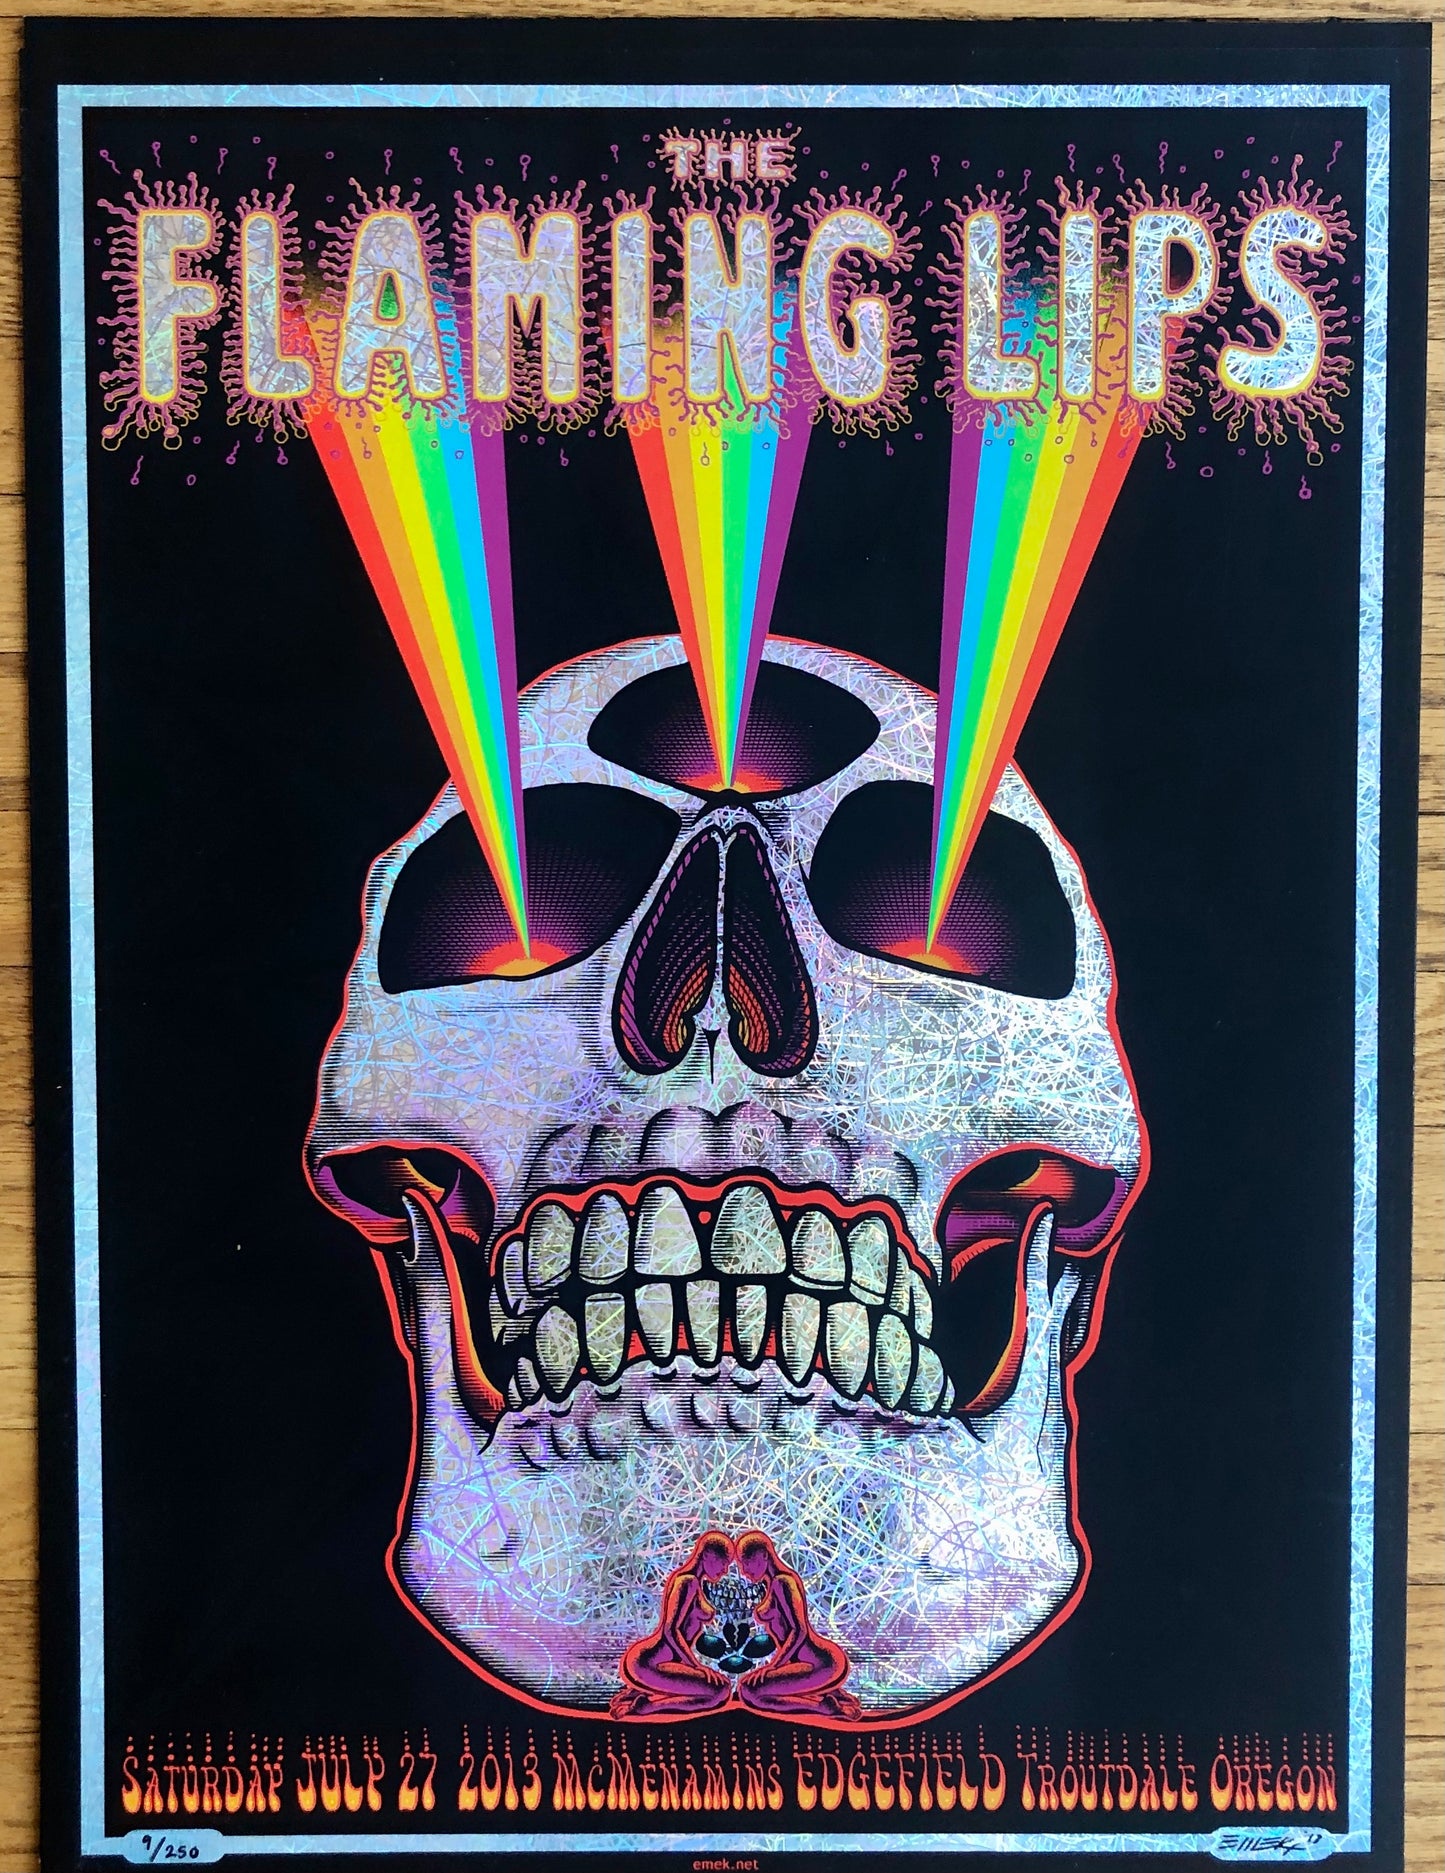 FLAMING LIPS TROUTDALE, OR 2013 EMEK